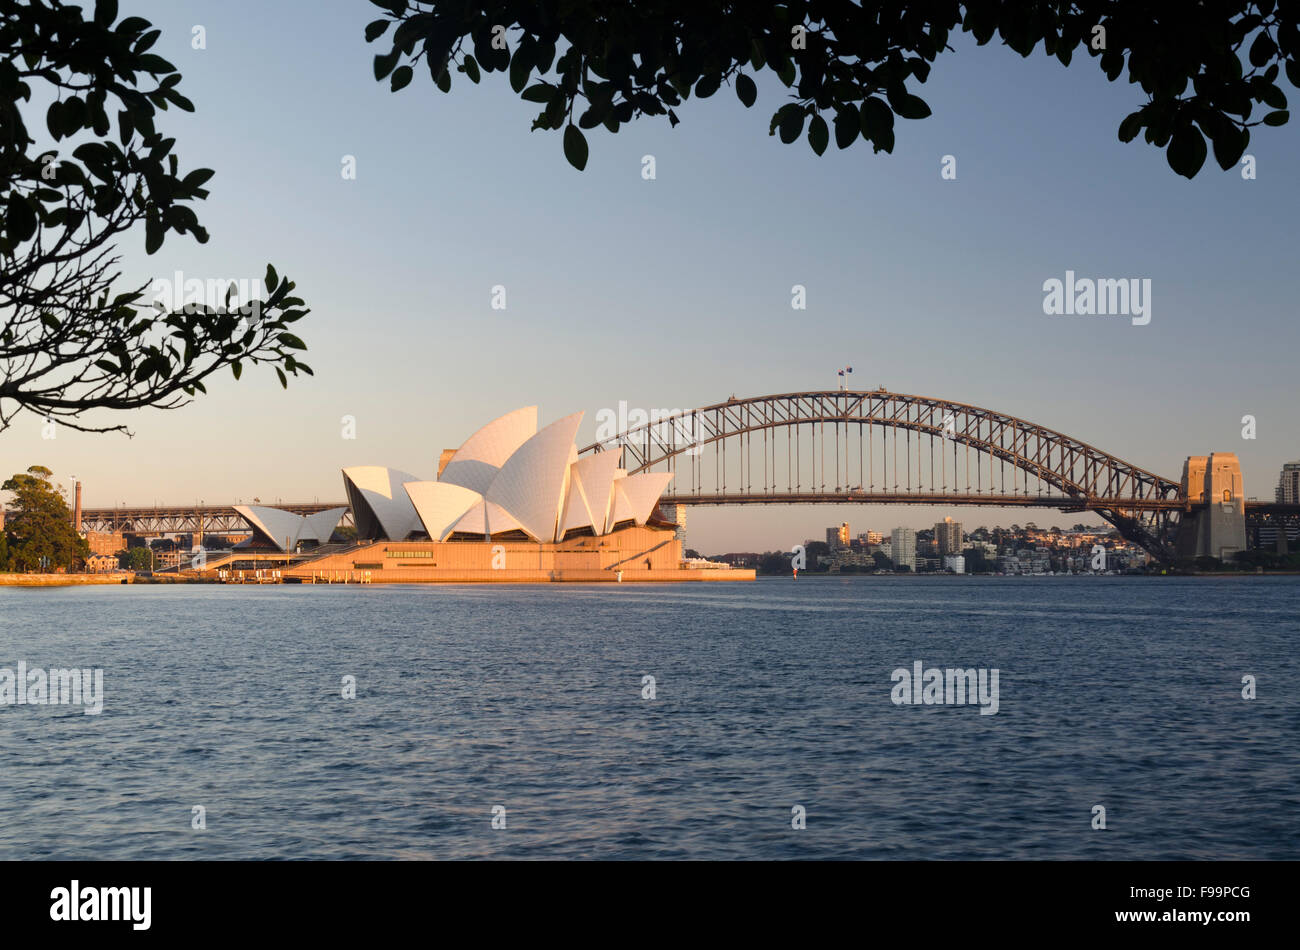 The Sydney Opera House and the Sydney Harbour Bridge from Lady Macquarie's Chair in the Royal Botanic Gardens, Australia Stock Photo